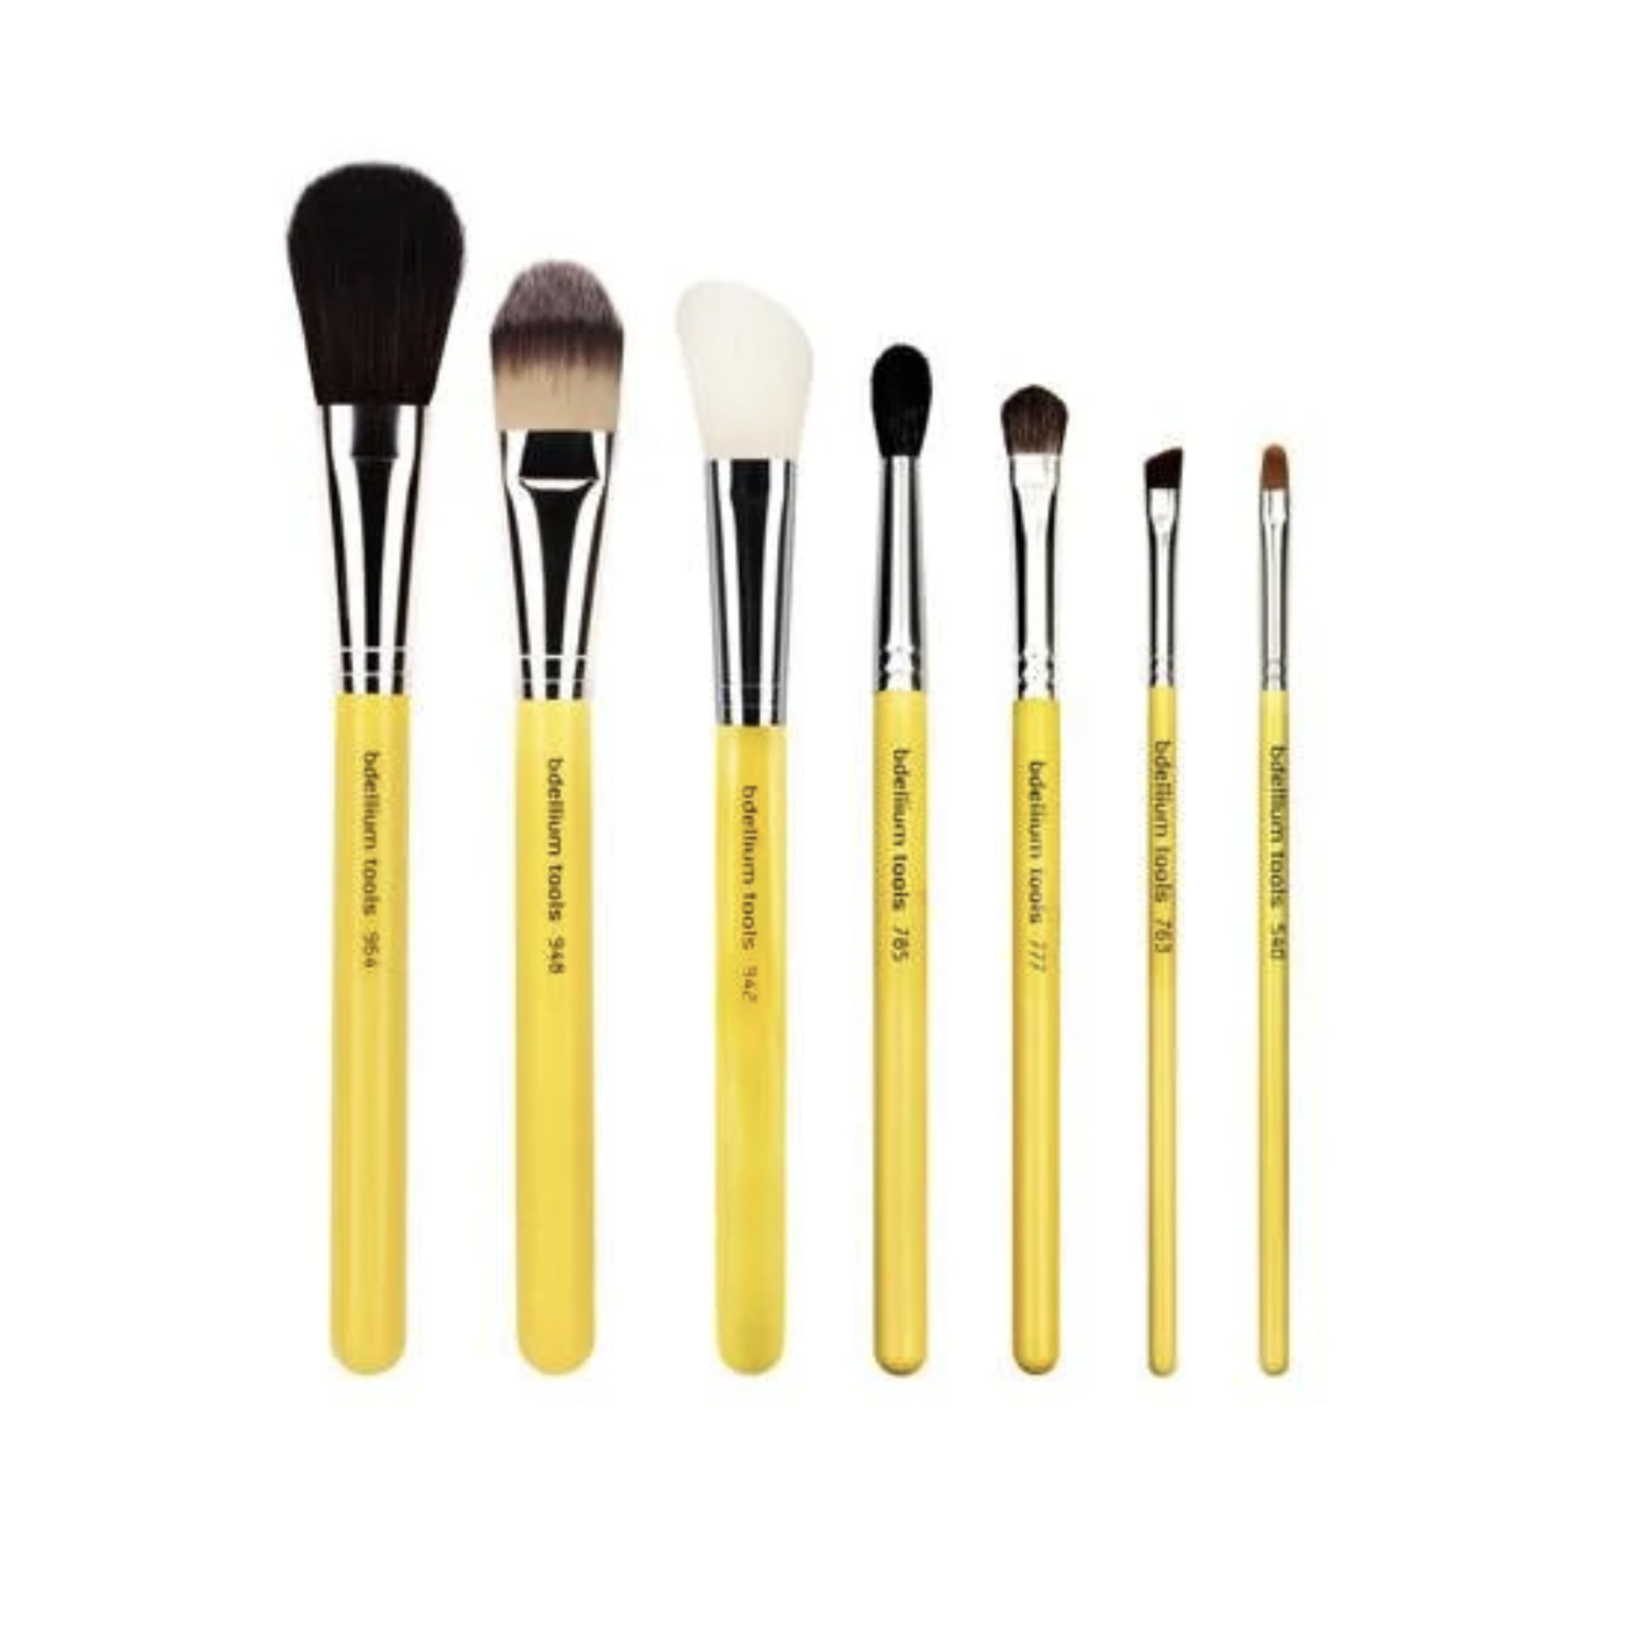 Bdellium Tools Studio Basic 7pc. Set with Roll-up Pouch